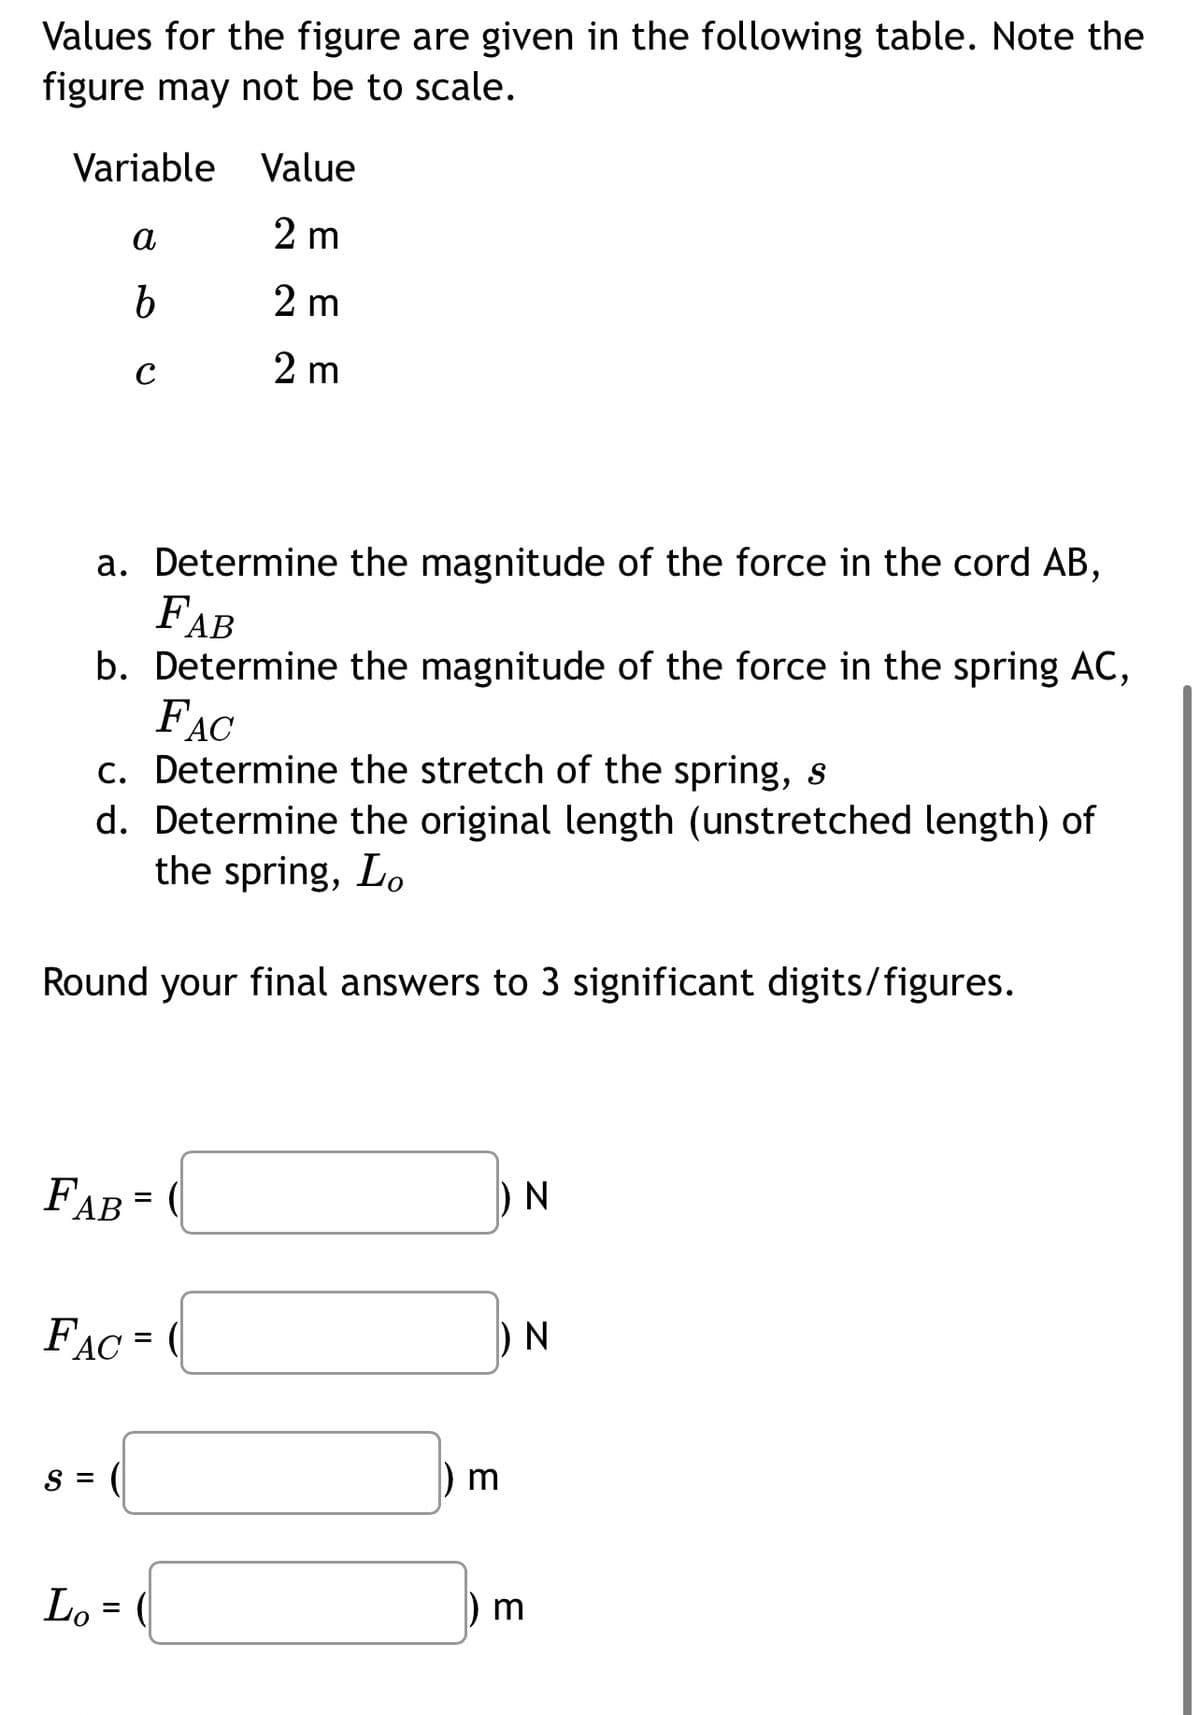 Values for the figure are given in the following table. Note the
figure may not be to scale.
Variable
a
b
FAC
S =
с
a.
Determine the magnitude of the force in the cord AB,
FAB
b. Determine the magnitude of the force in the spring AC,
FAC
c. Determine the stretch of the spring, s
d. Determine the original length (unstretched length) of
the spring, Lo
Round your final answers to 3 significant digits/figures.
FAB =
Lo =
Value
2 m
2 m
2 m
=
3
N
3
N